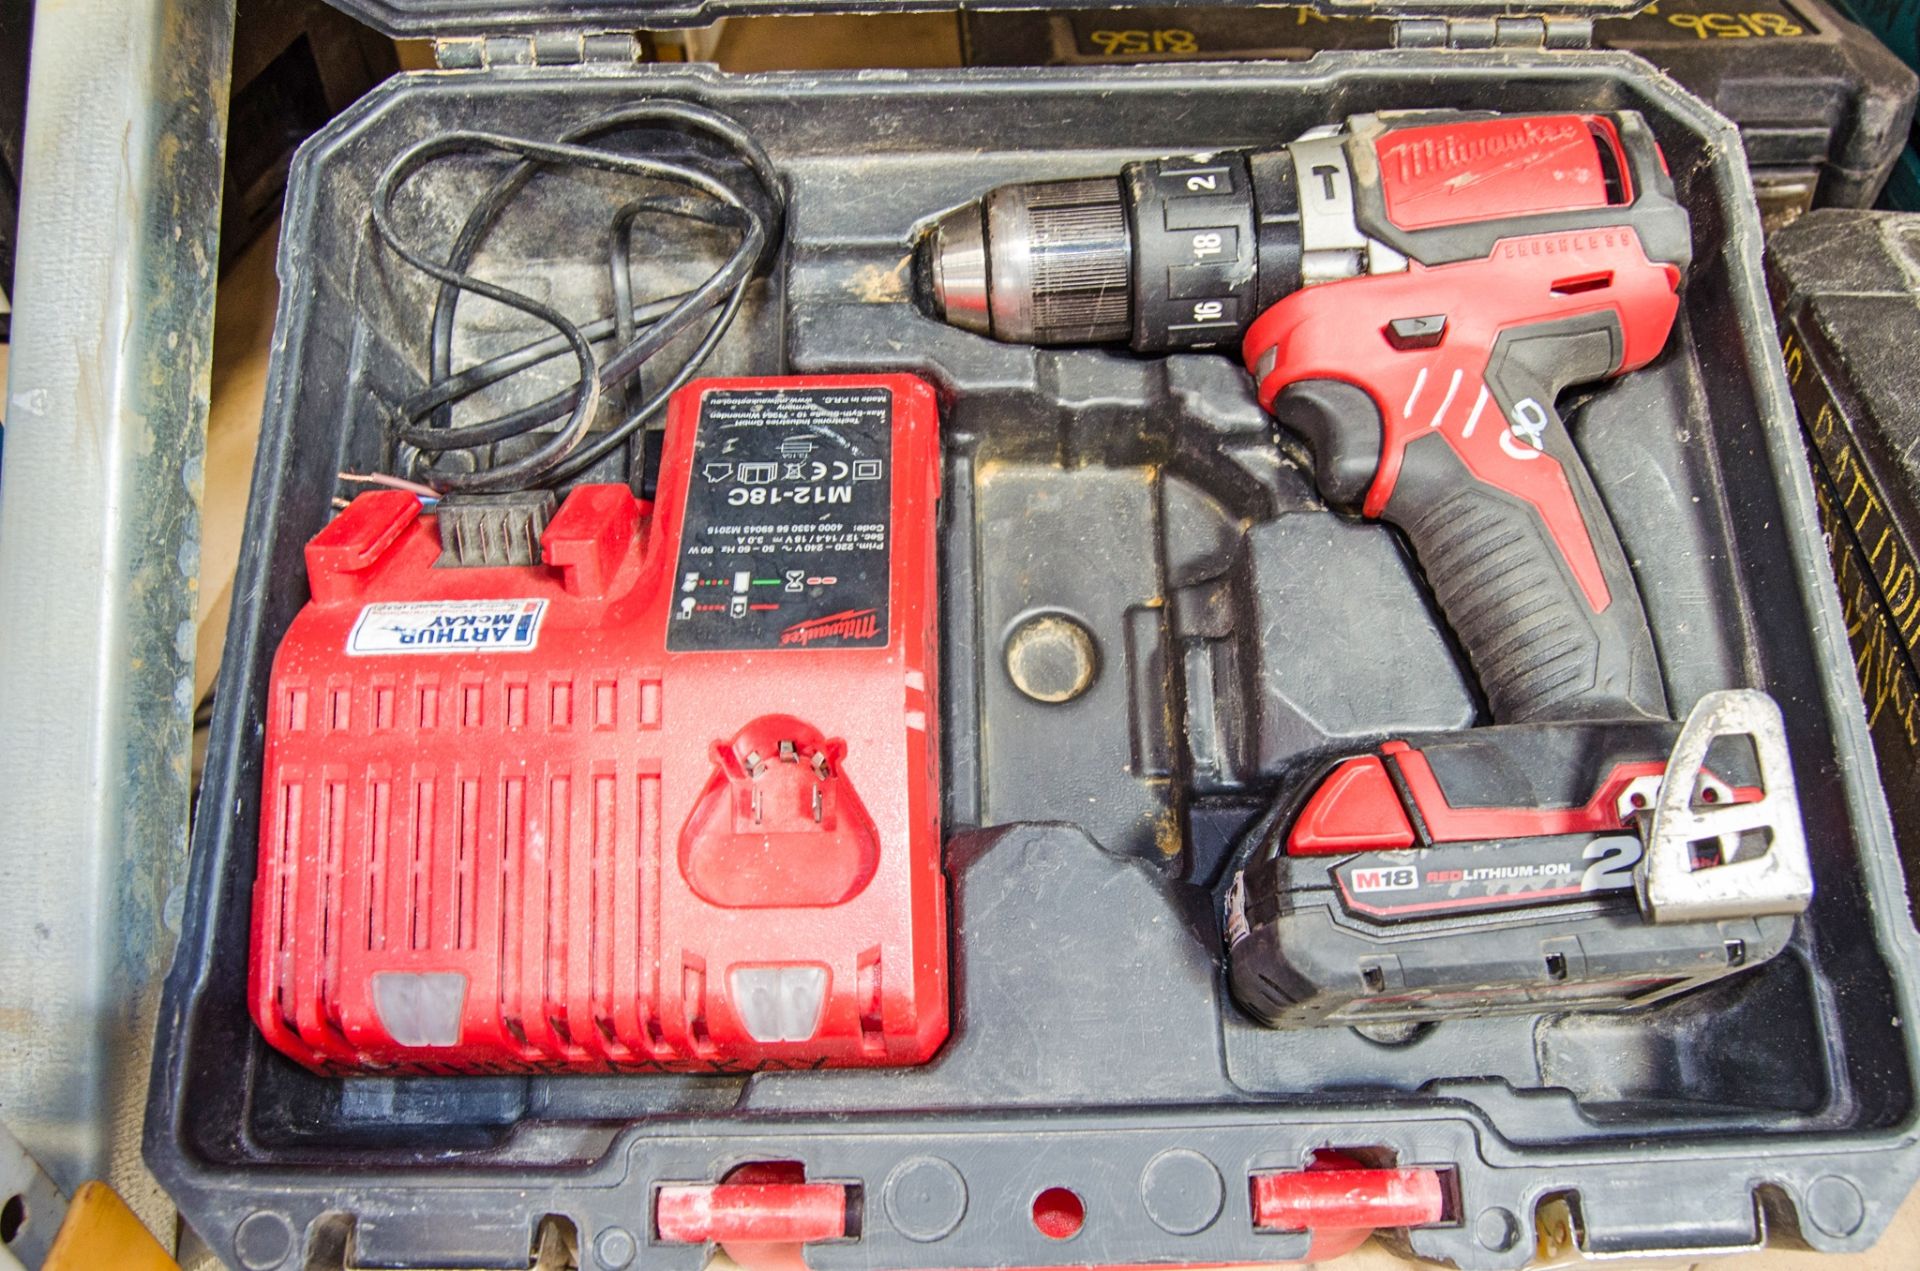 Milwaukee M18 BPD 18v cordless power drill c/w battery, charger and carry case AM5018